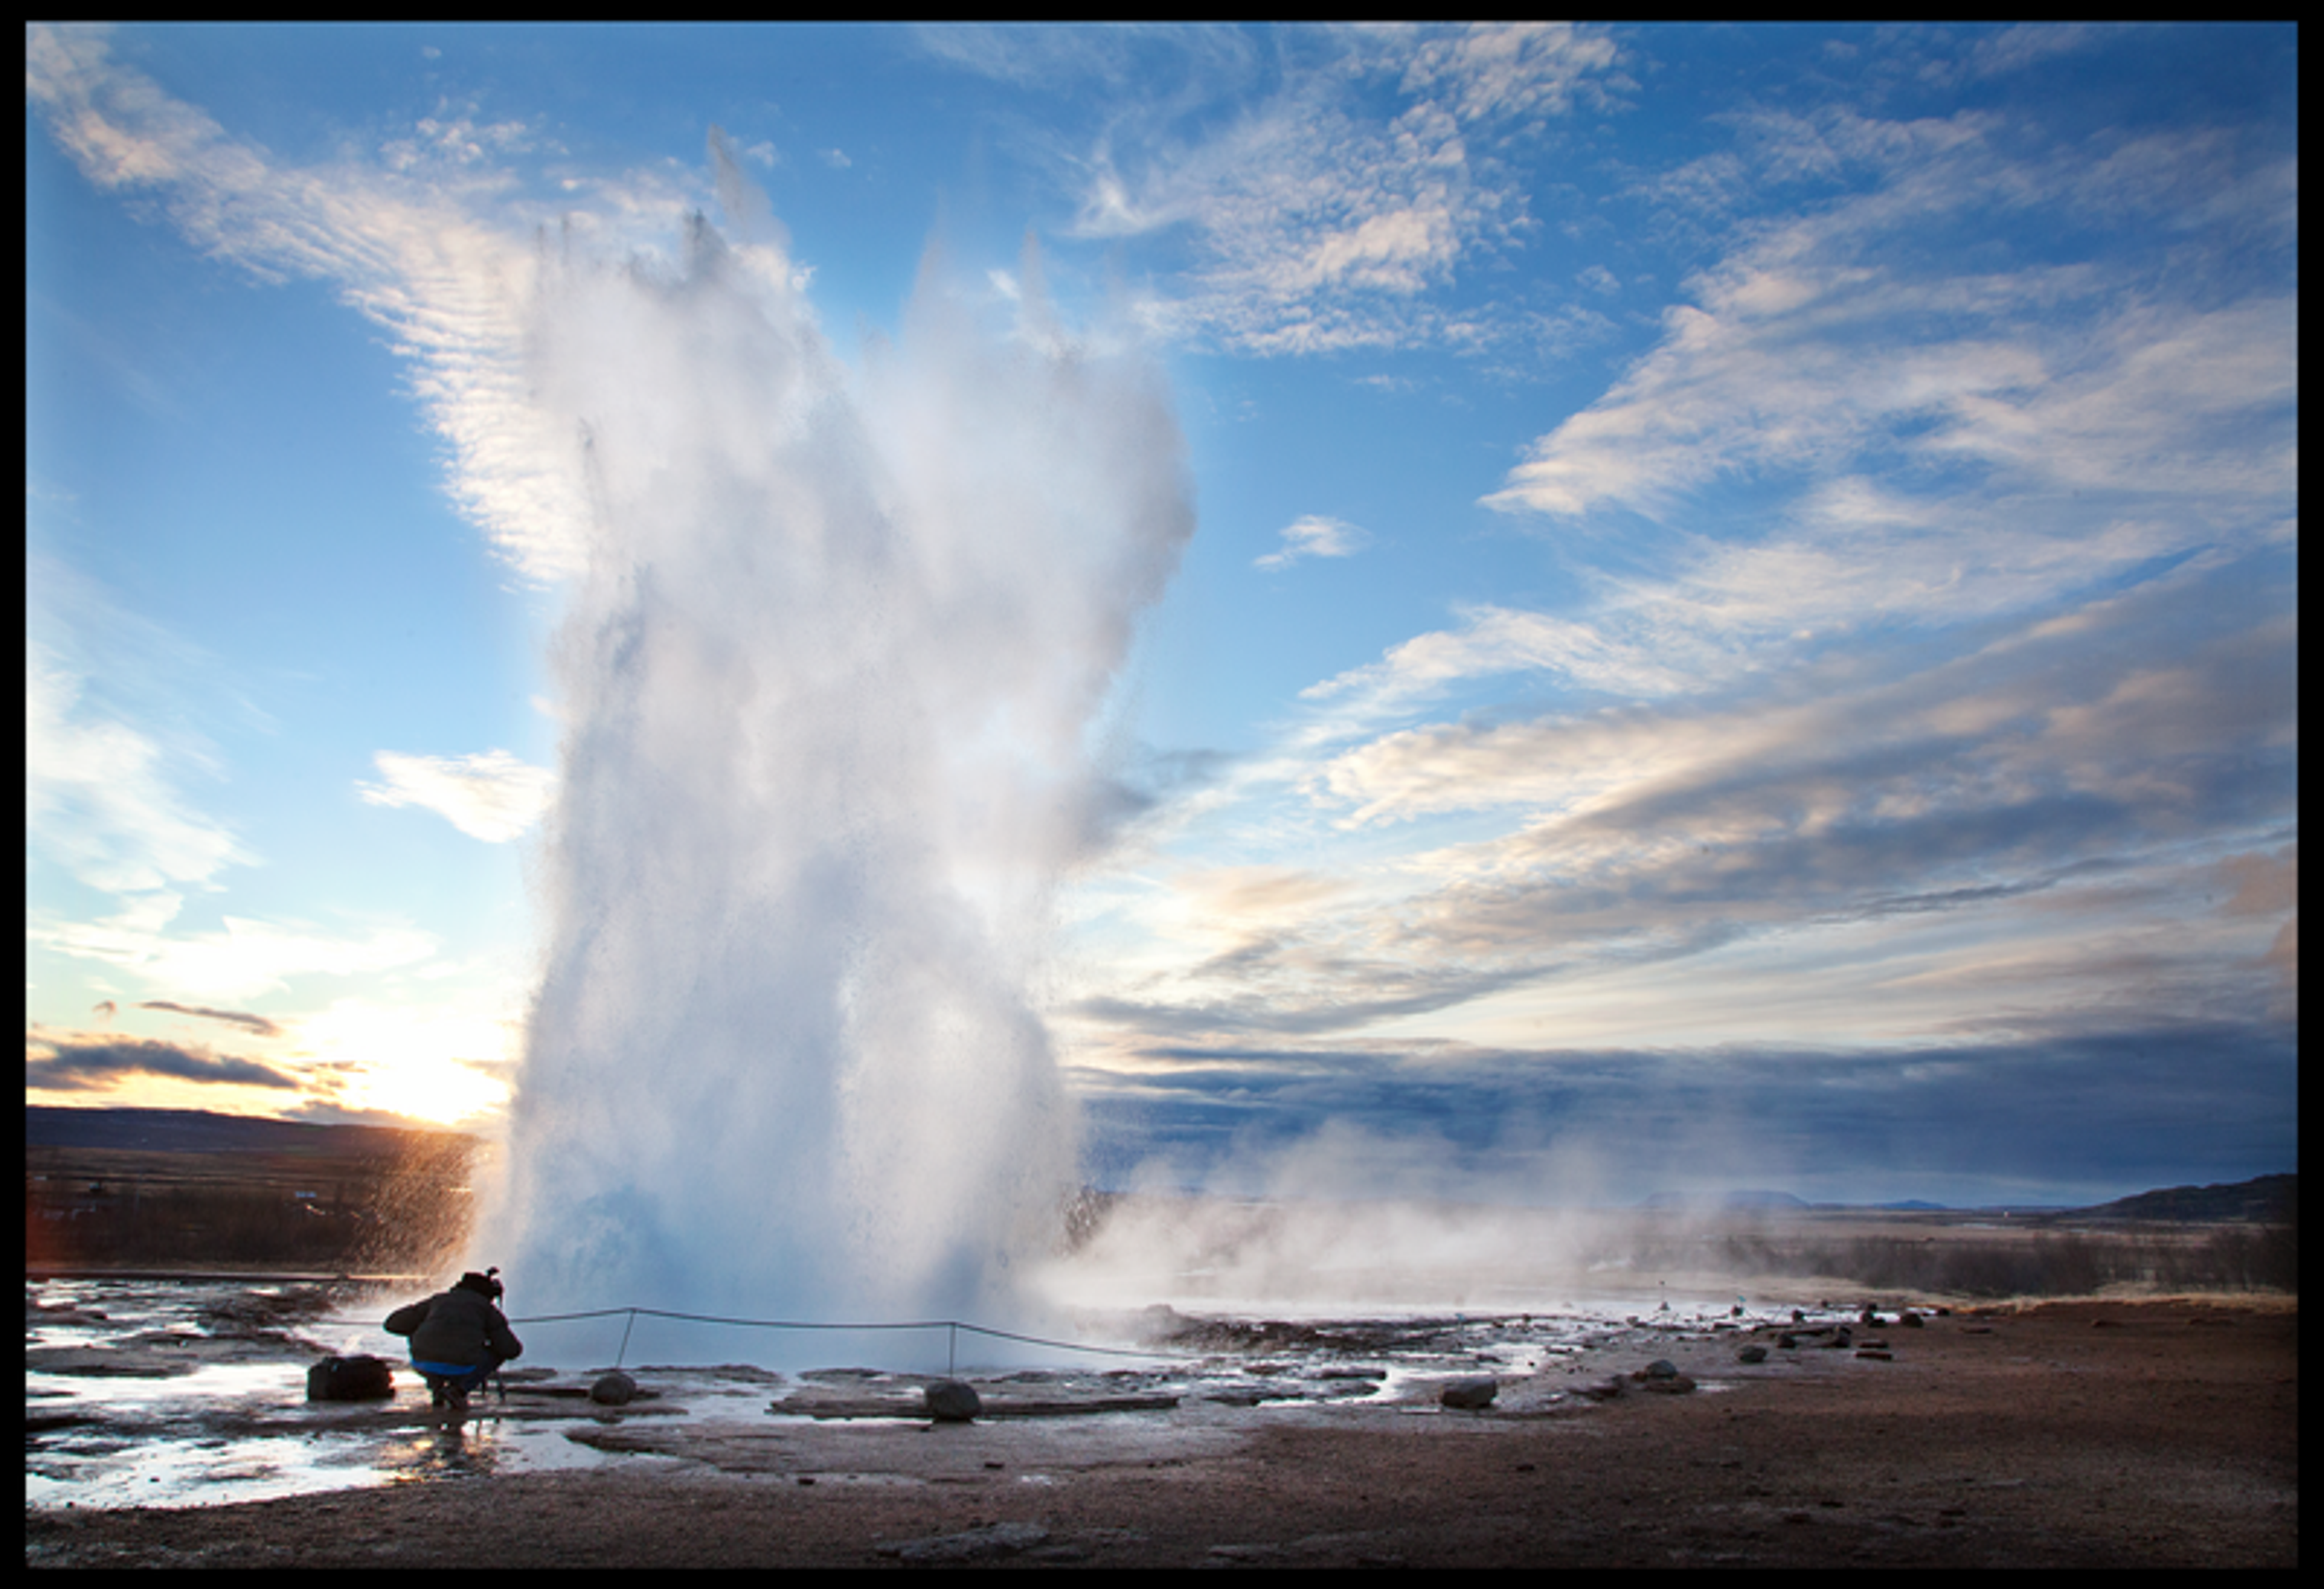 Geysir geothermal area in the golden circle, Iceland.